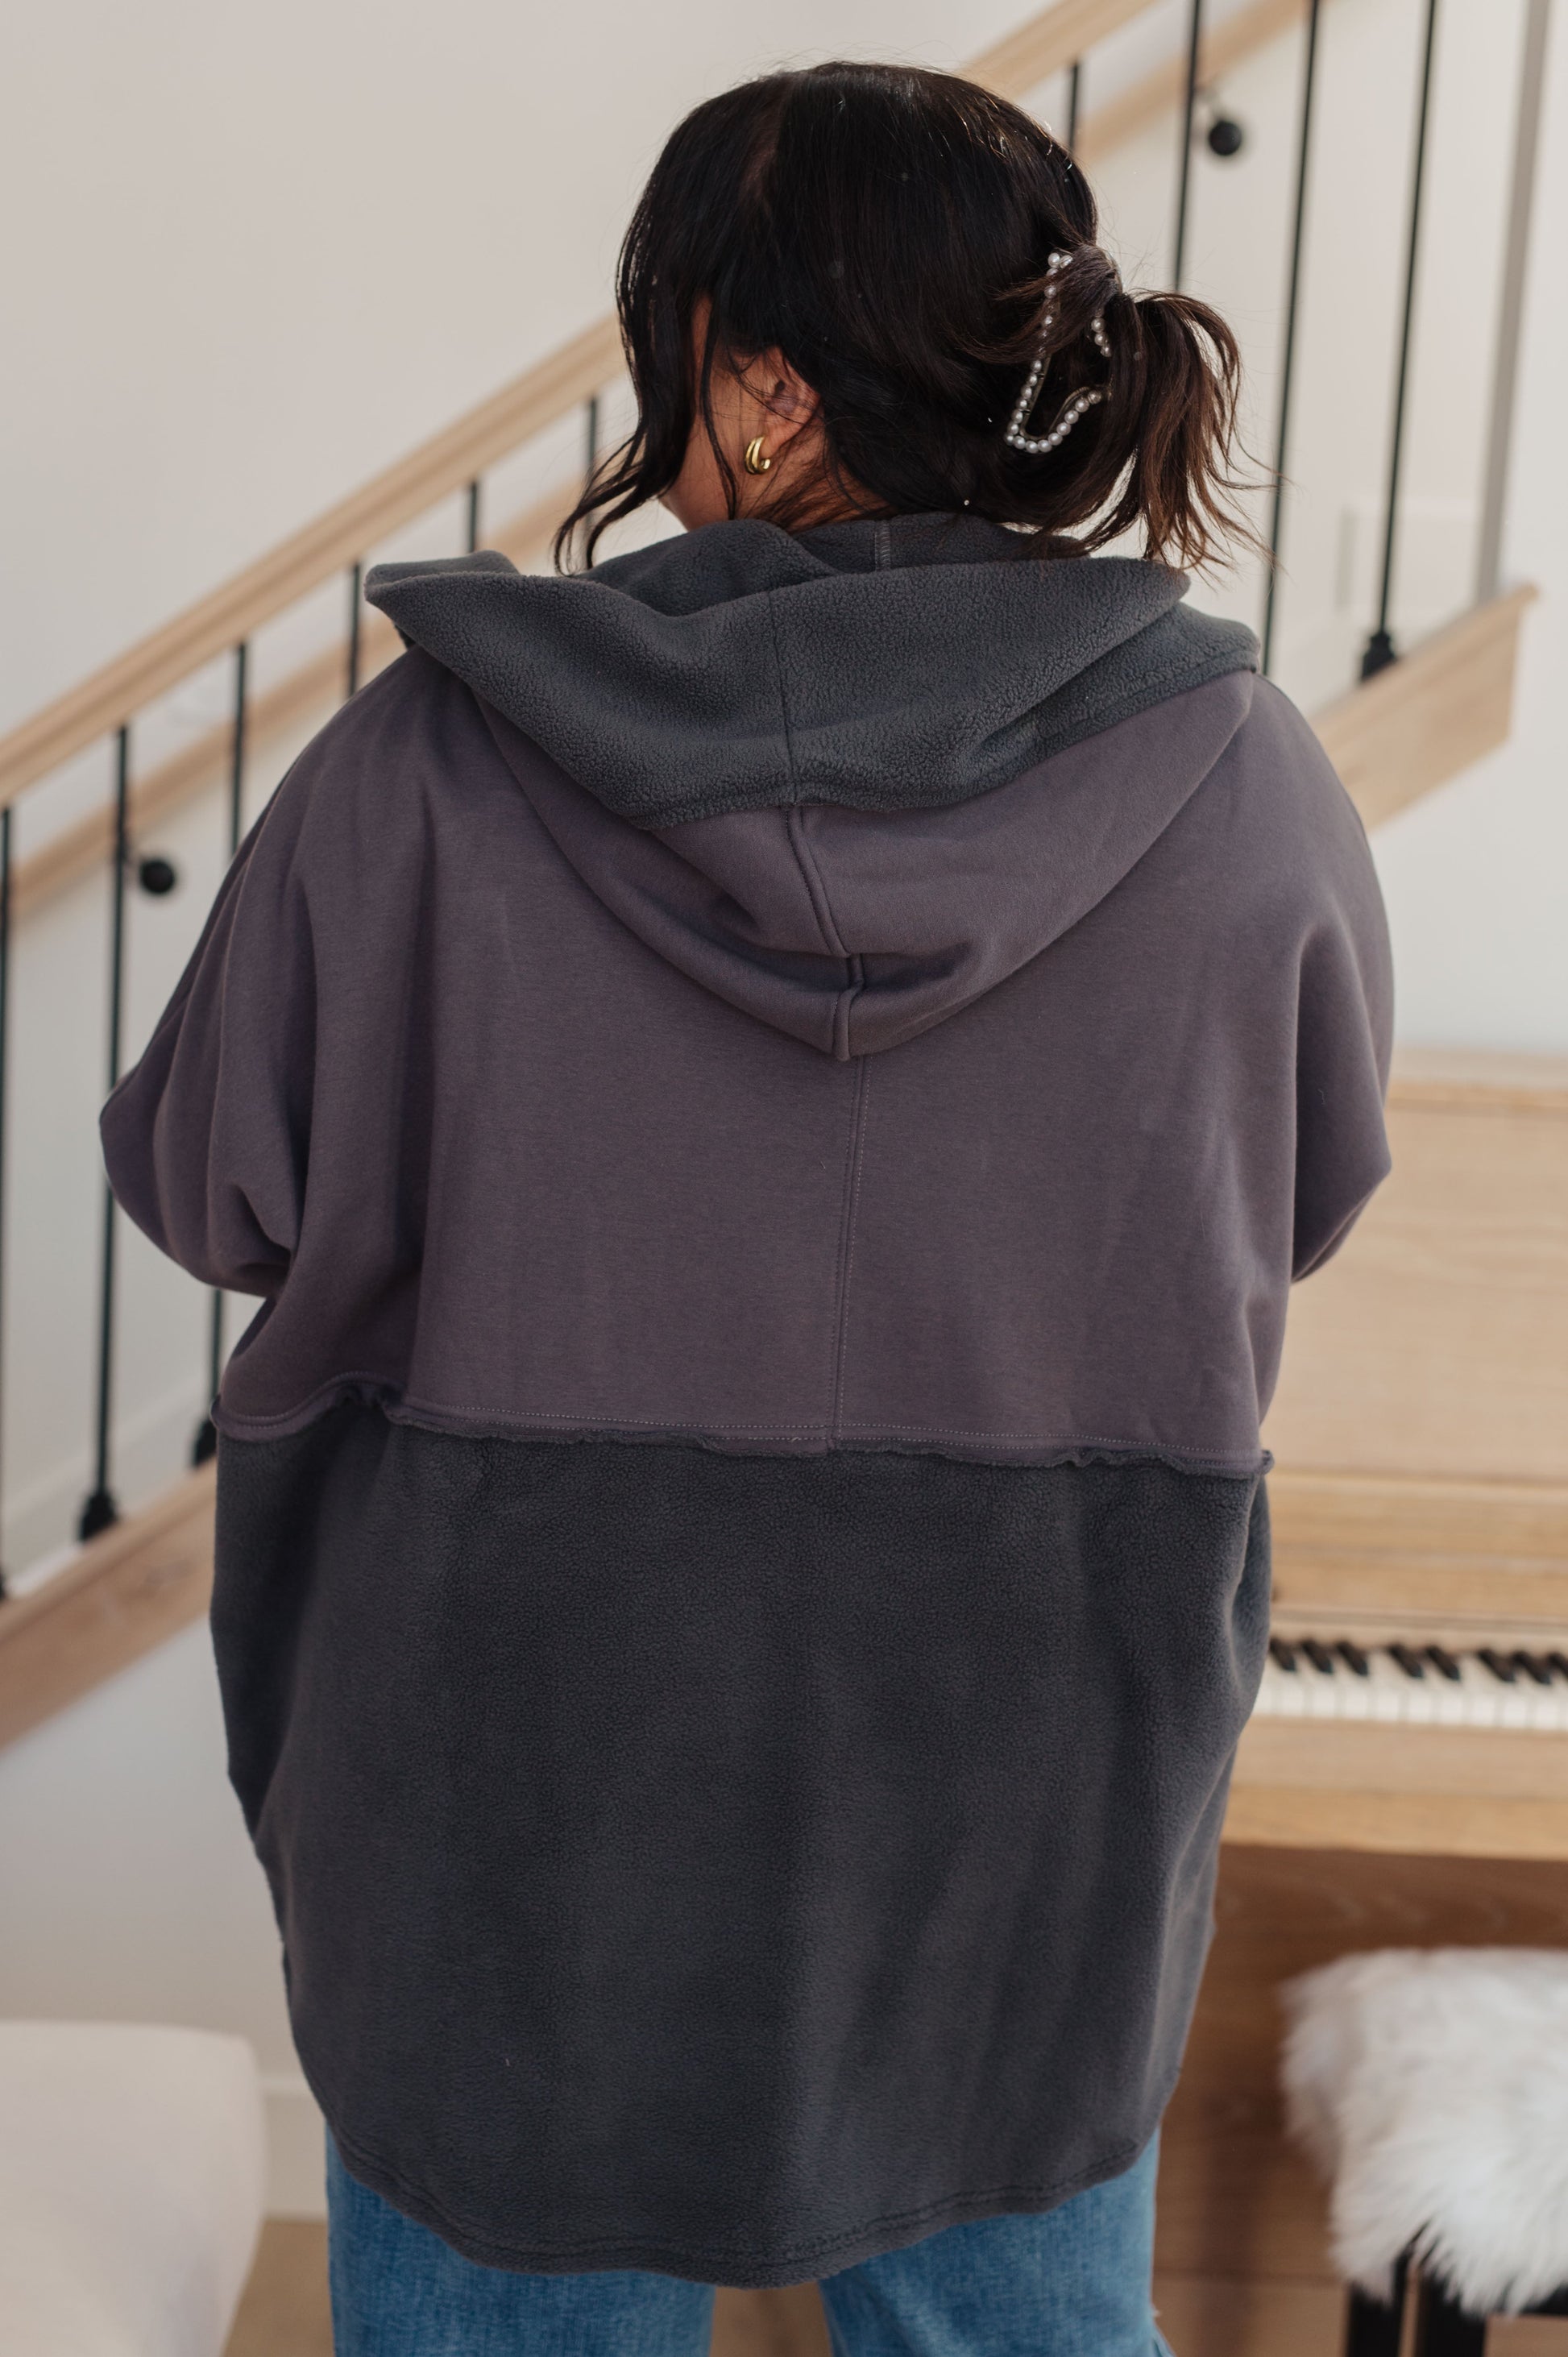 Room For Two Hooded Sweatshirt Ave Shops